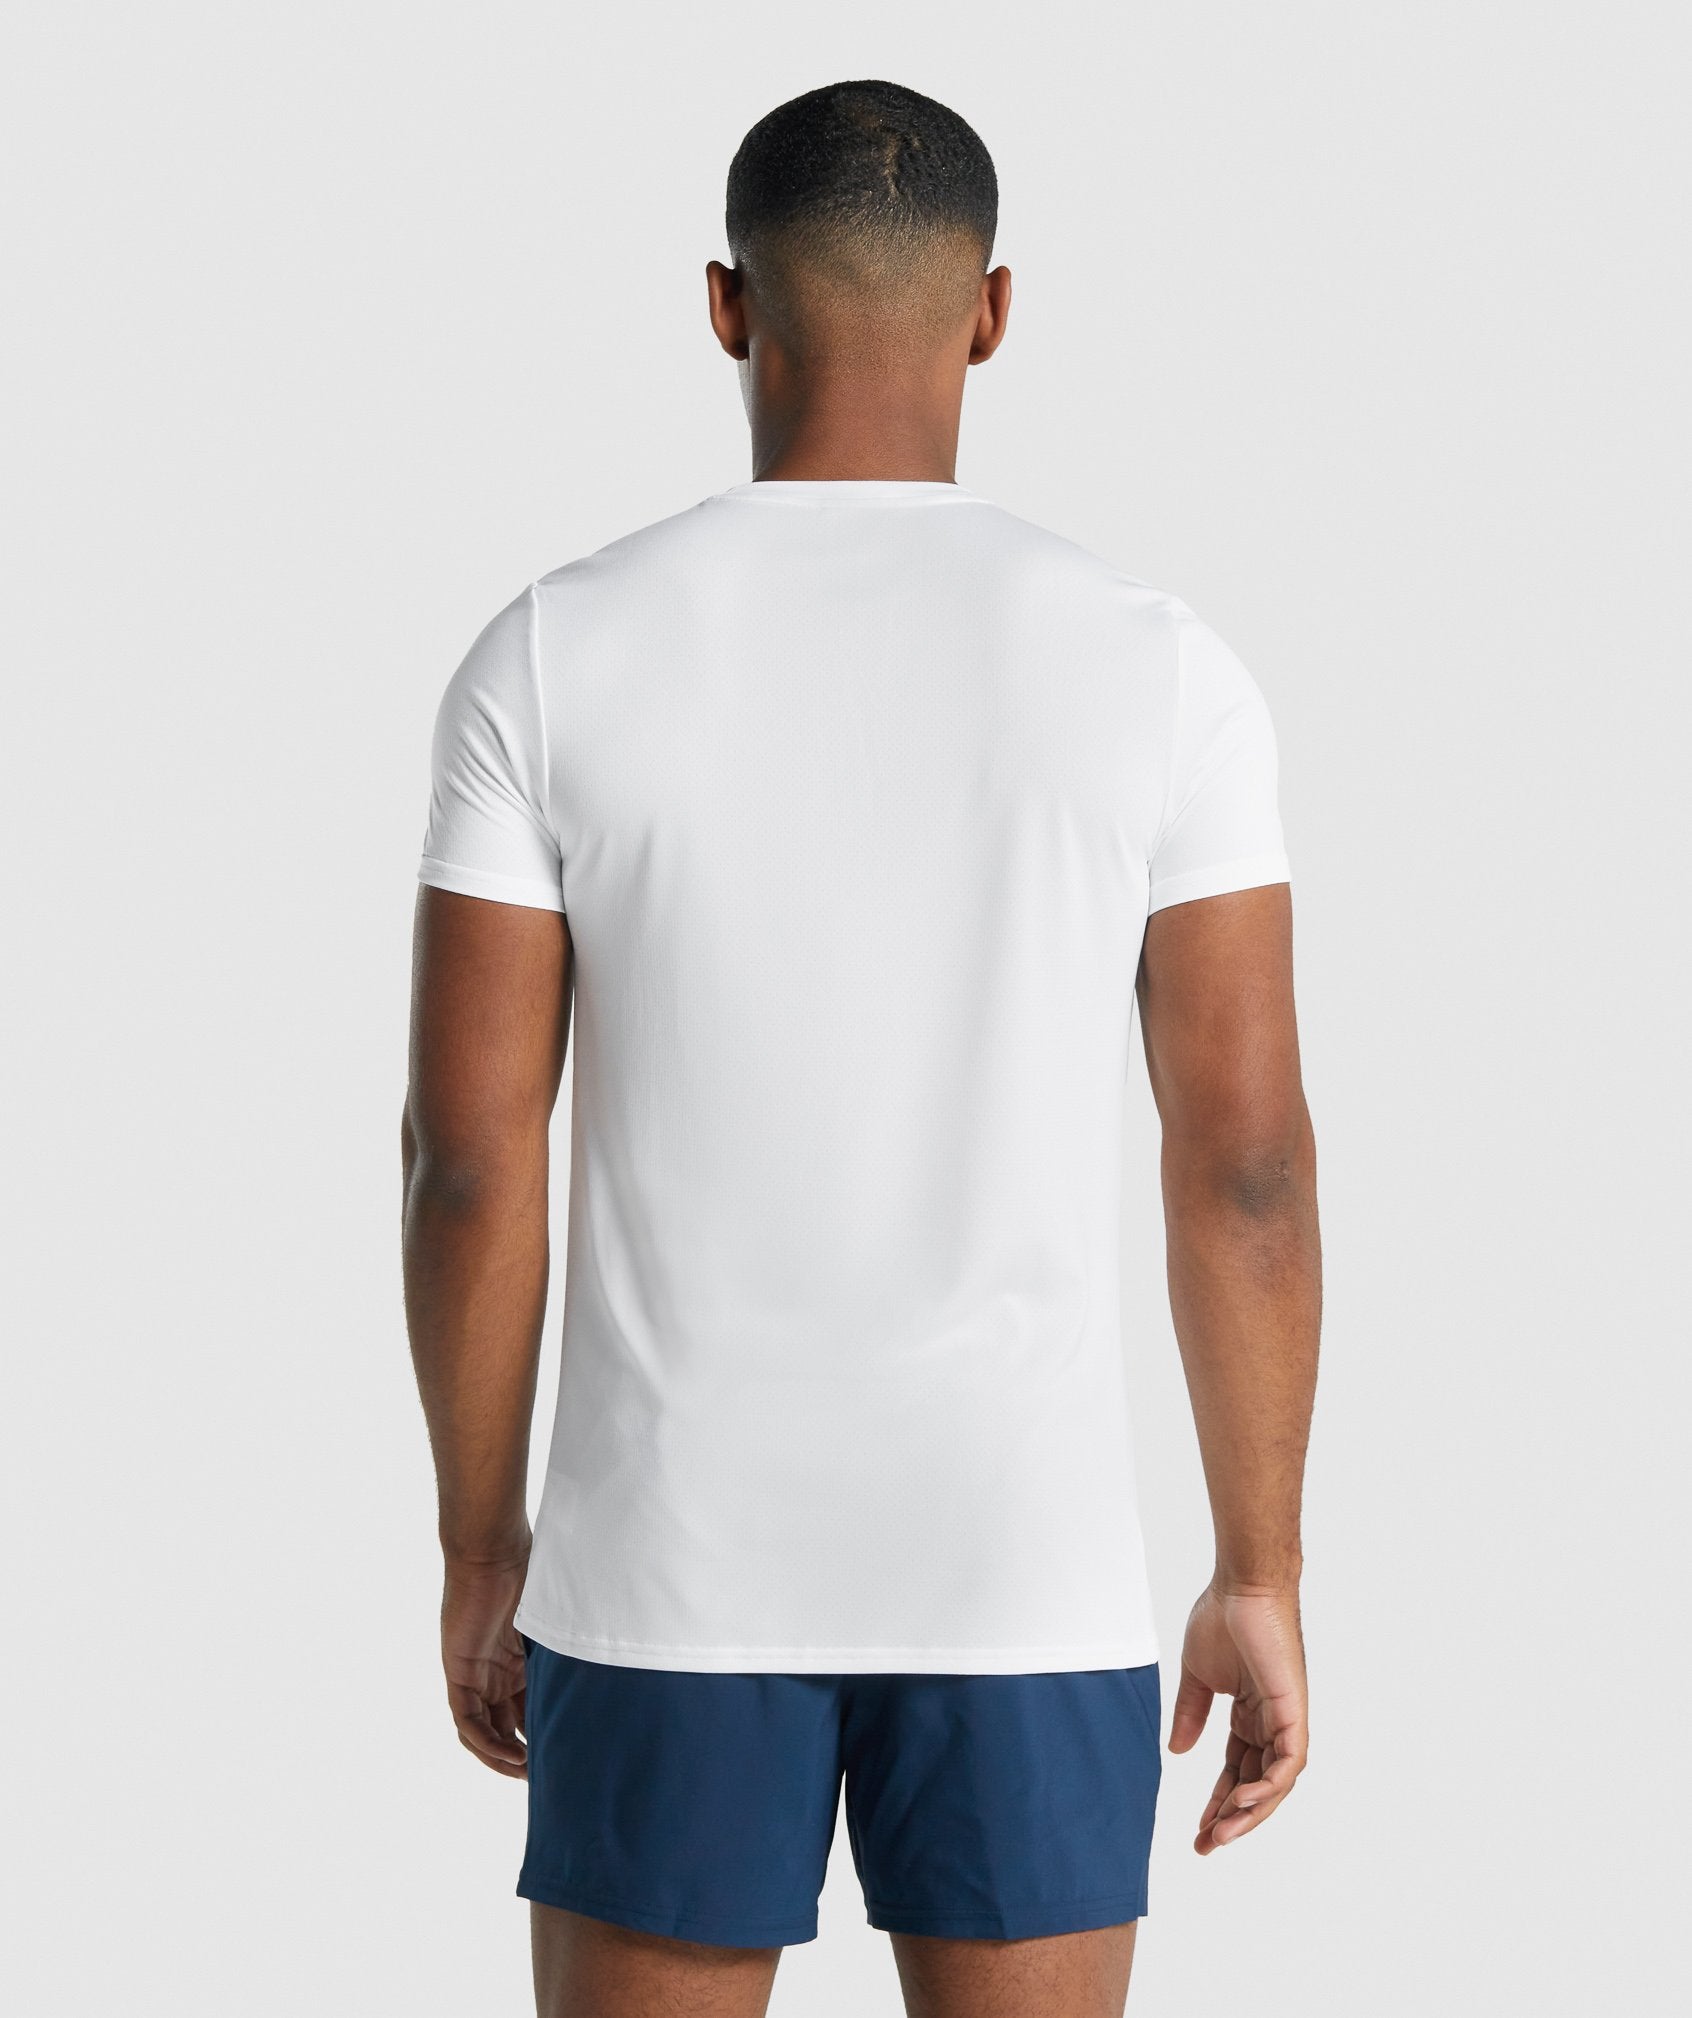 Arrival Graphic T-Shirt in White - view 2